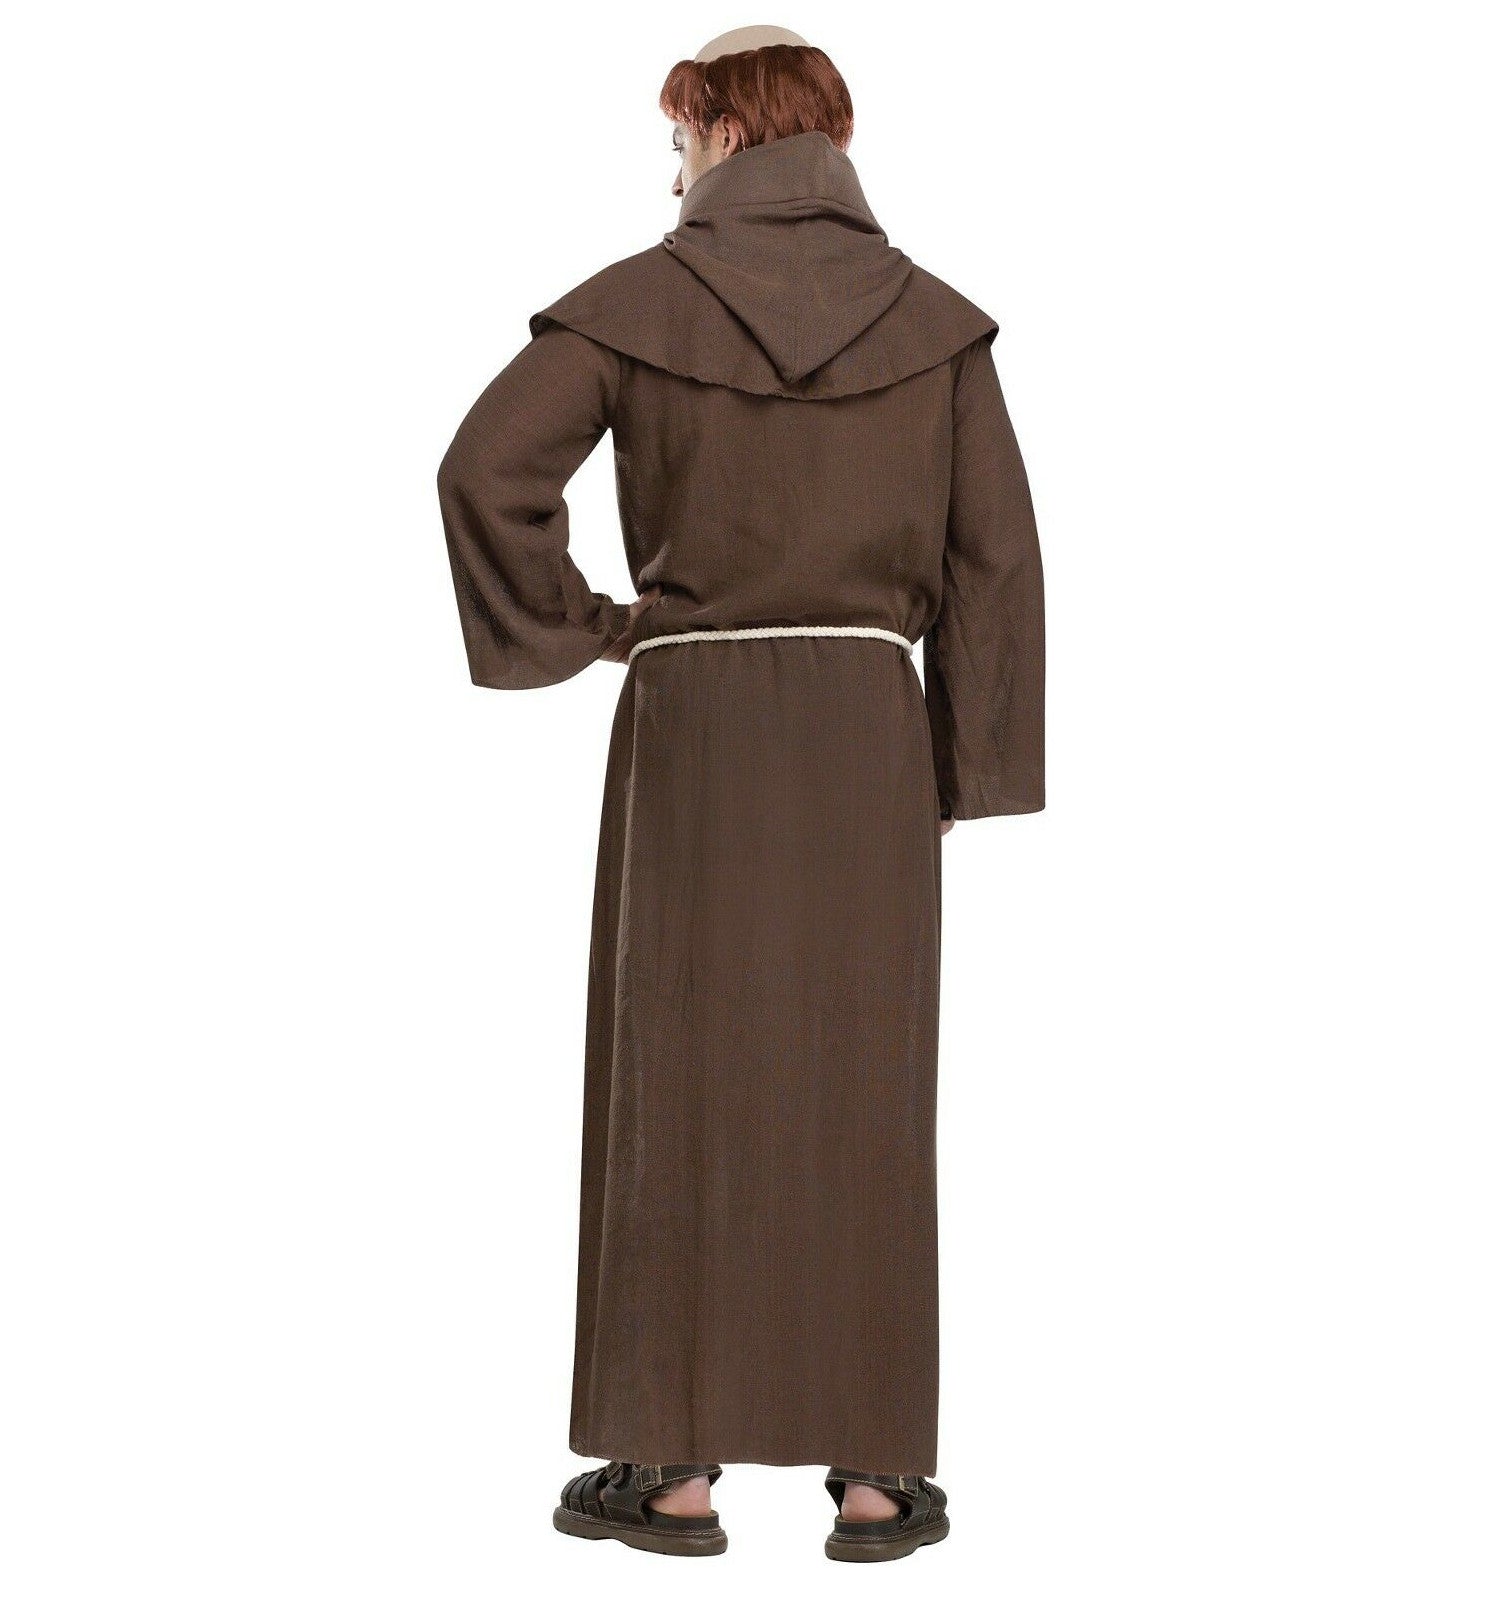 Adult Medieval Monk Hooded Robe Costume